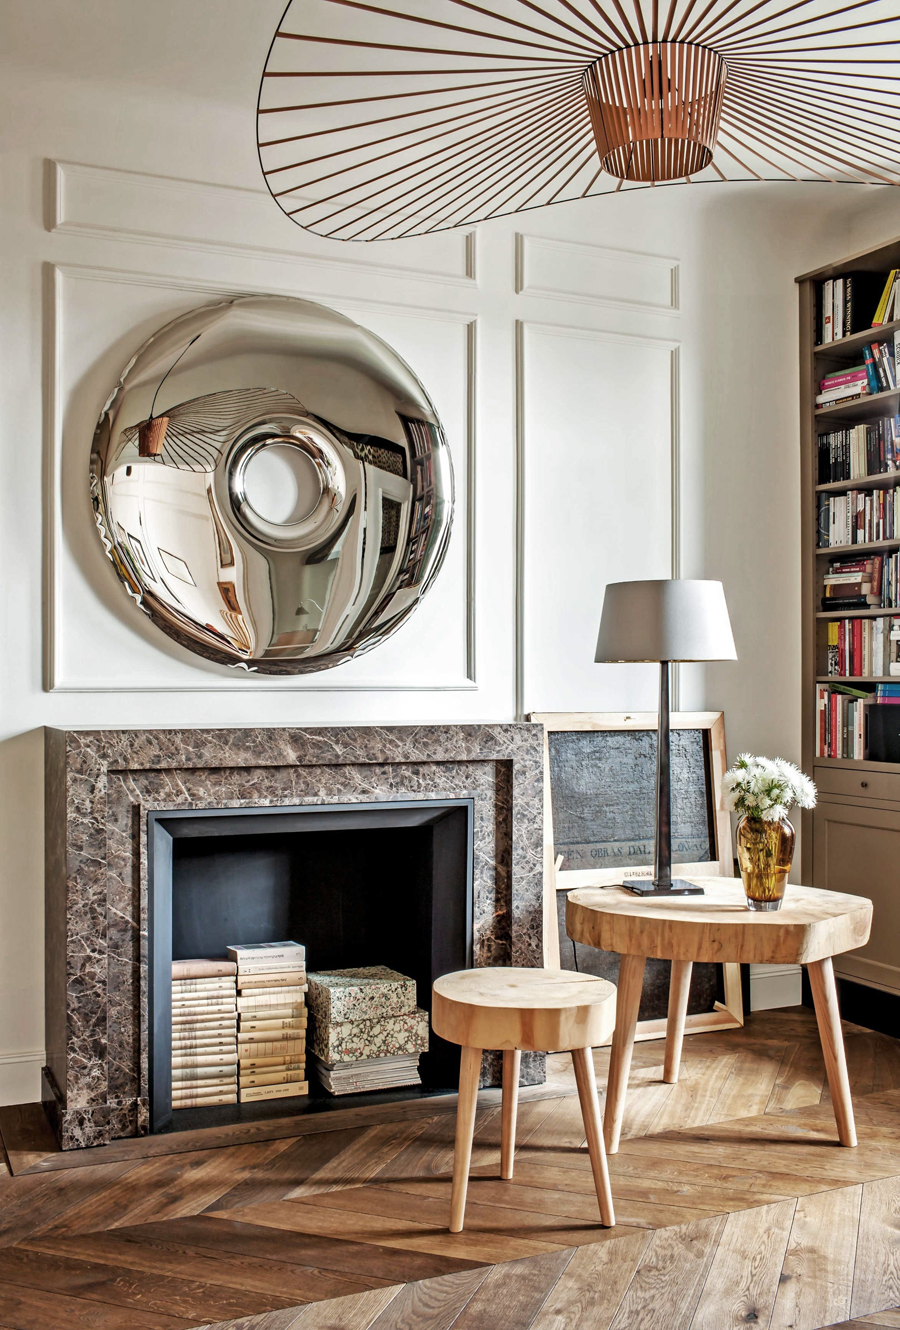 Decor Inspiration: A 1930's Parisian-style apartment in Warsaw